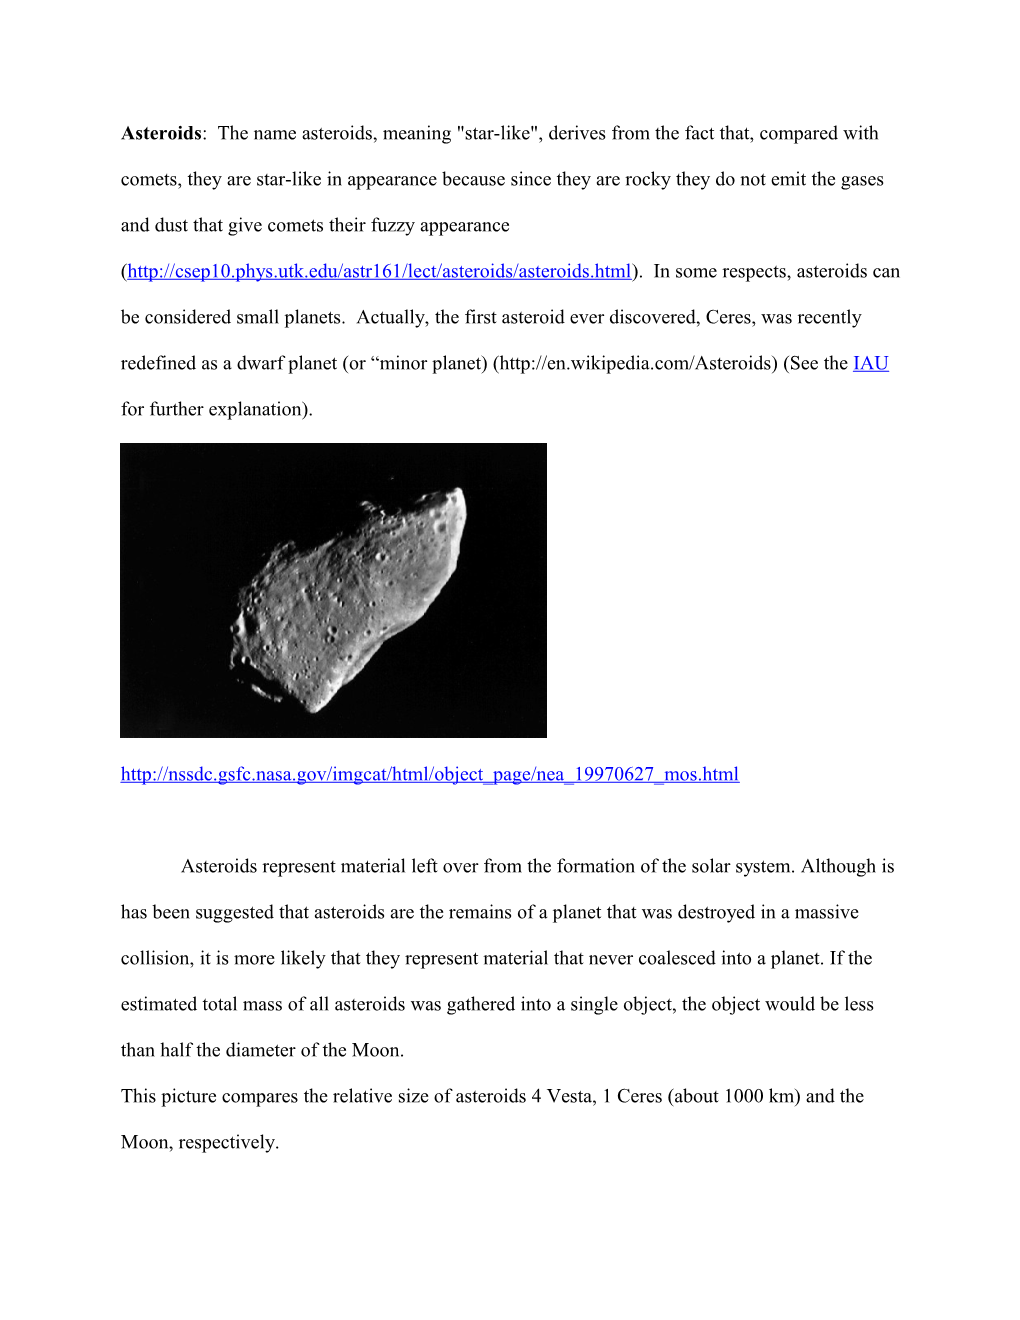 Asteroids and Meteoroids